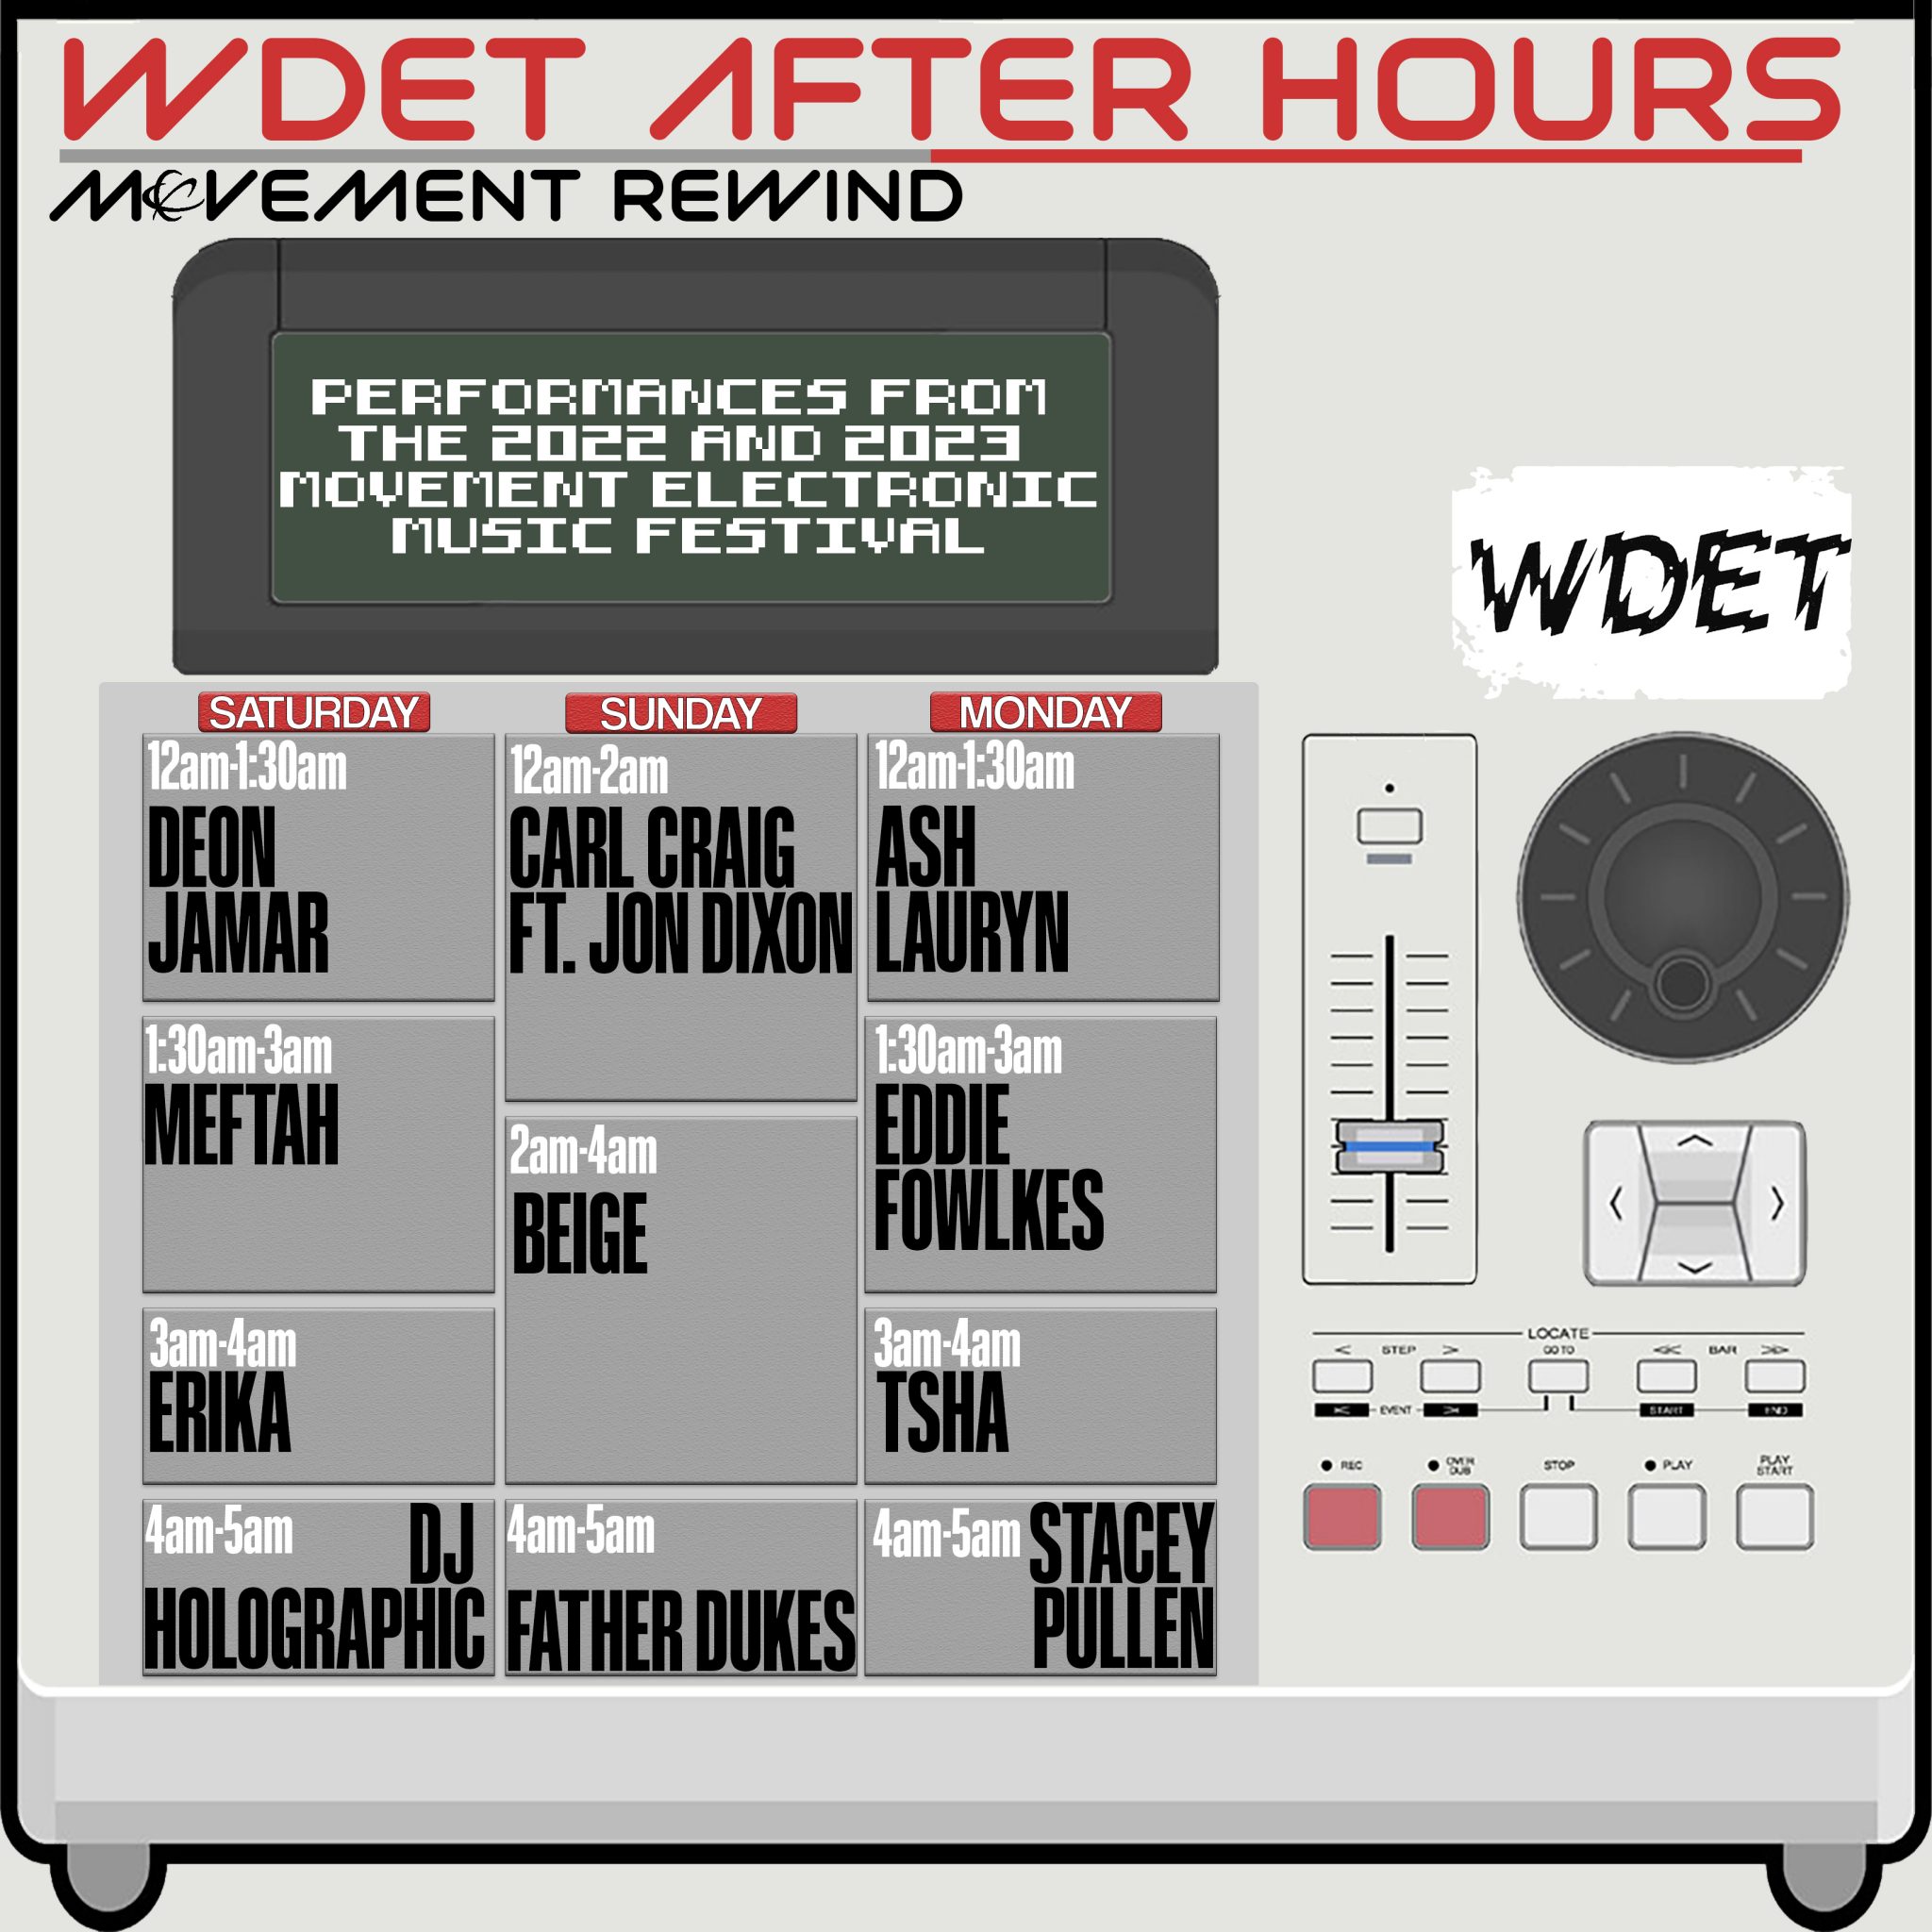 Movement WDET After Hours Schedule